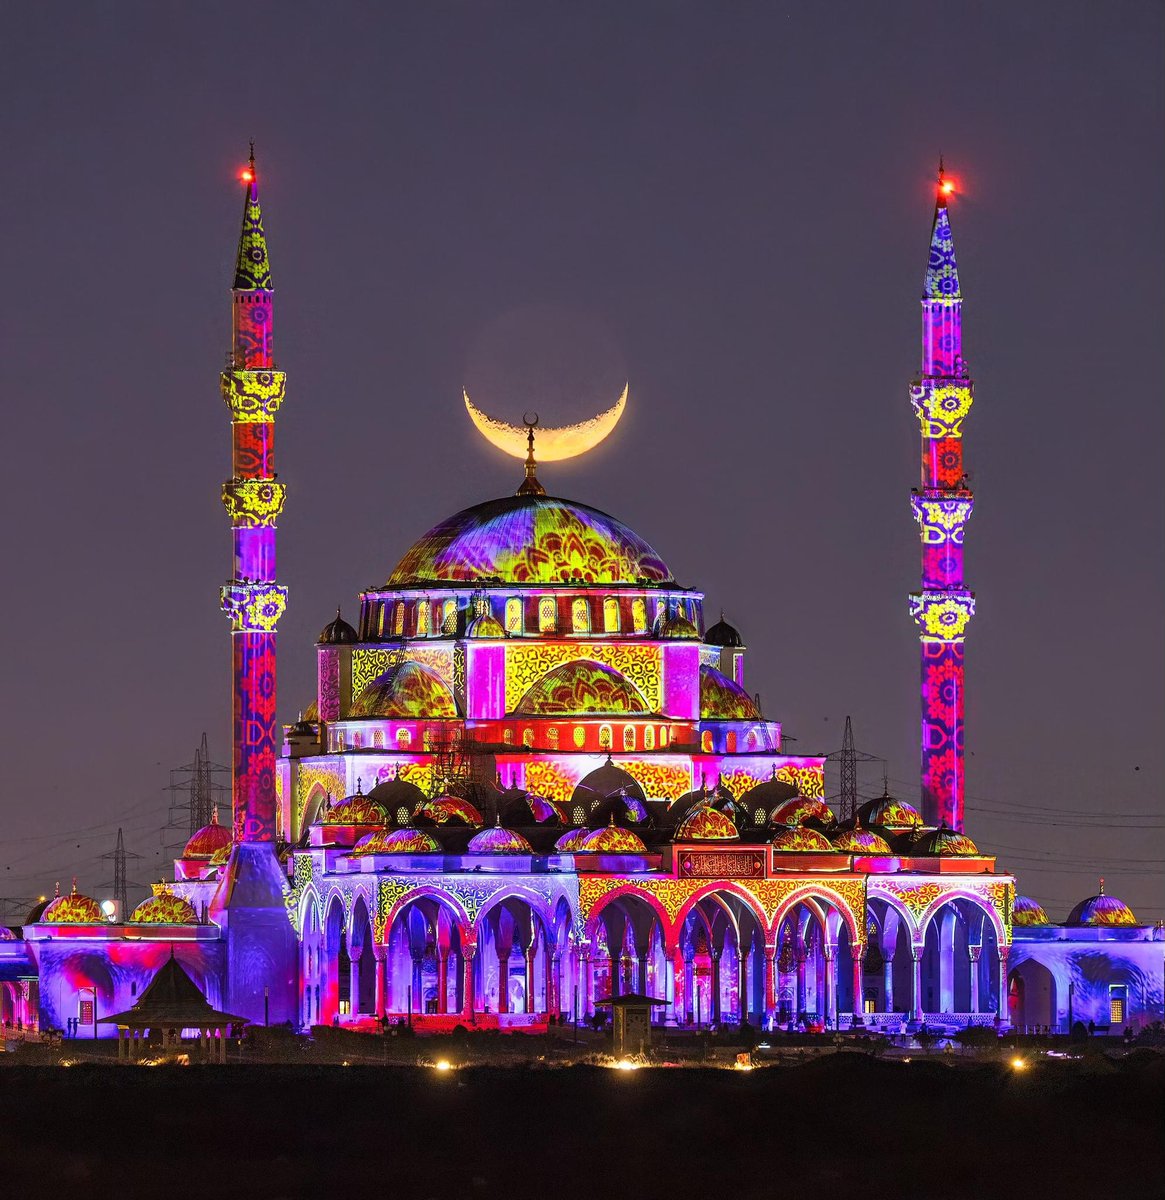 “The smiling crescent moon setting over the Sharjah Mosque beautifully lit with psychedelic colors during the annual Sharjah Light Festival.” 📷 Canon R5 | 400mm | ƒ/6.3 | 1/5s | ISO 1600 👉 Photo by Greg Metro 📍 Planned with PhotoPills: photopills.com